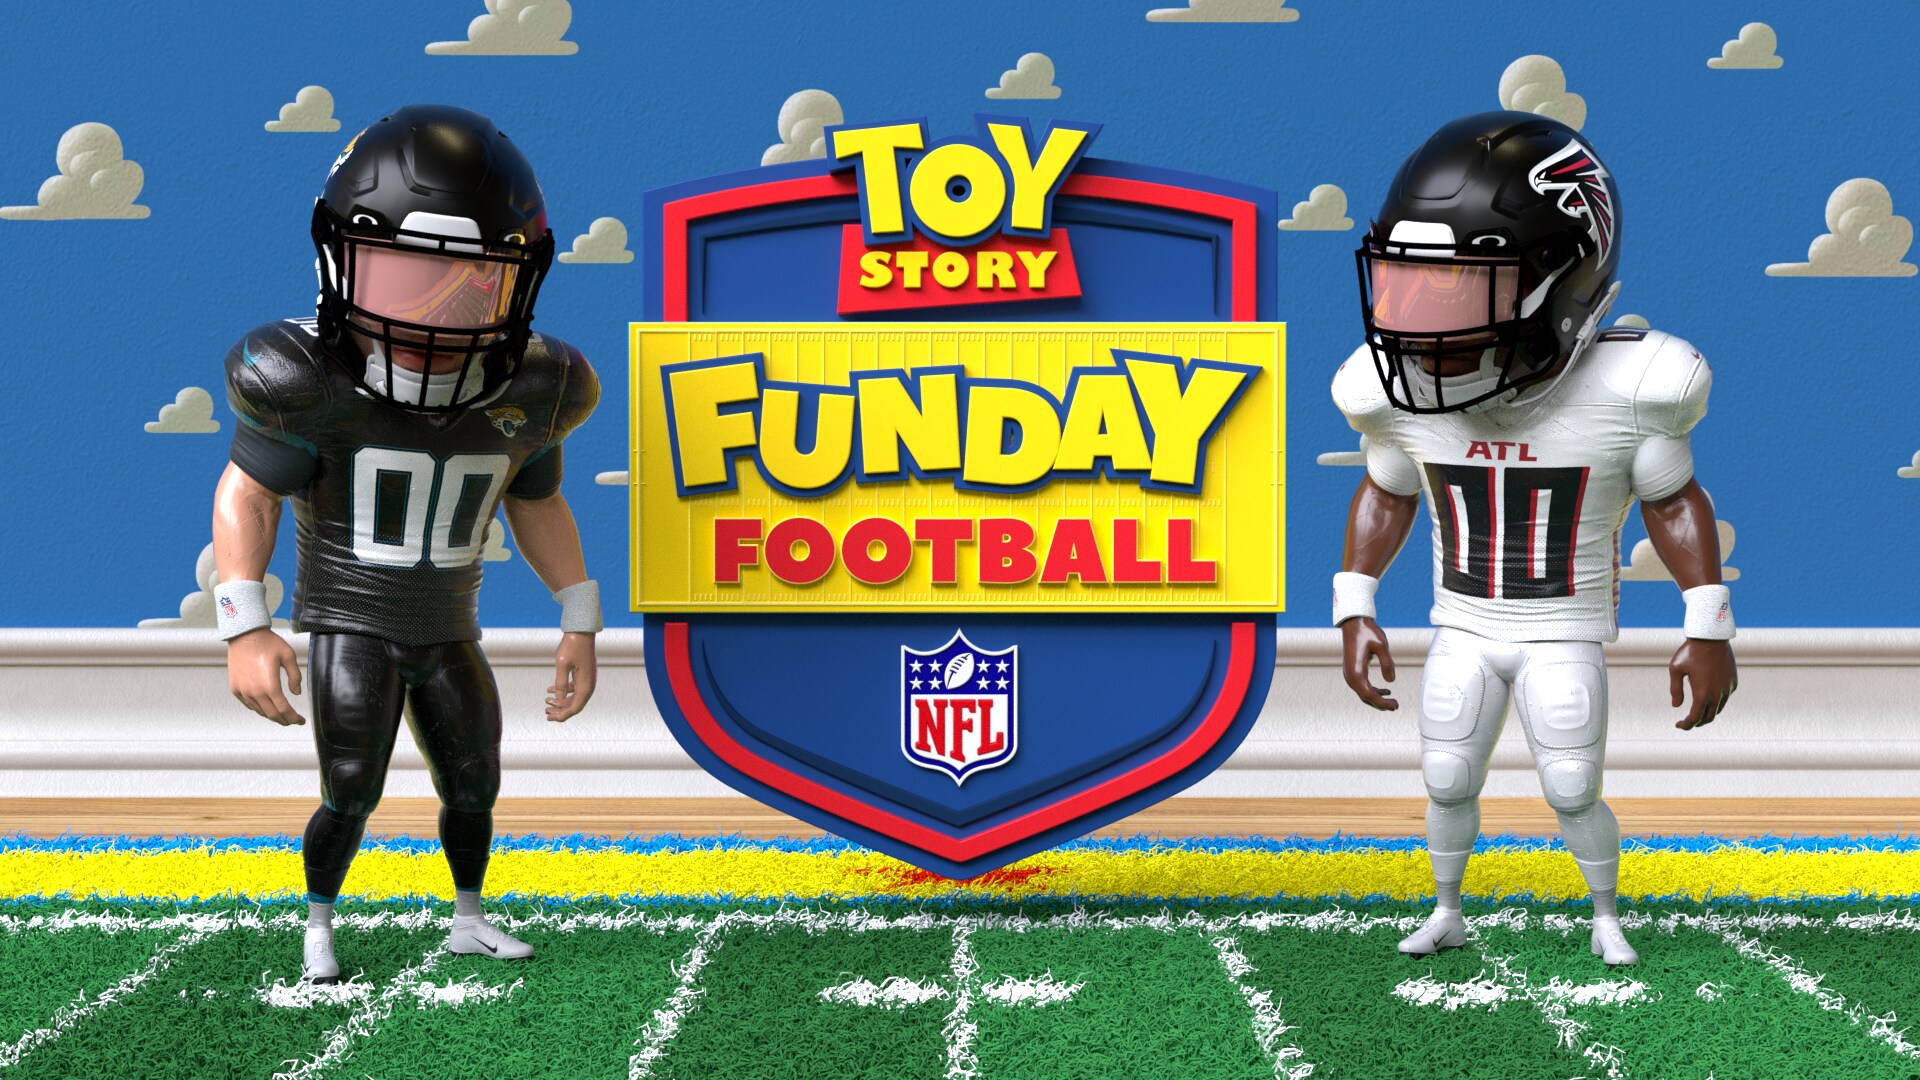 To Infinity and Beyond!” ESPN, The Walt Disney Company, and the NFL are  Bringing Fans a First-of-its-Kind, Fully-Animated Alternate NFL Game  Presentation of the Falcons and Jaguars in Pixar's Iconic “Toy Story”